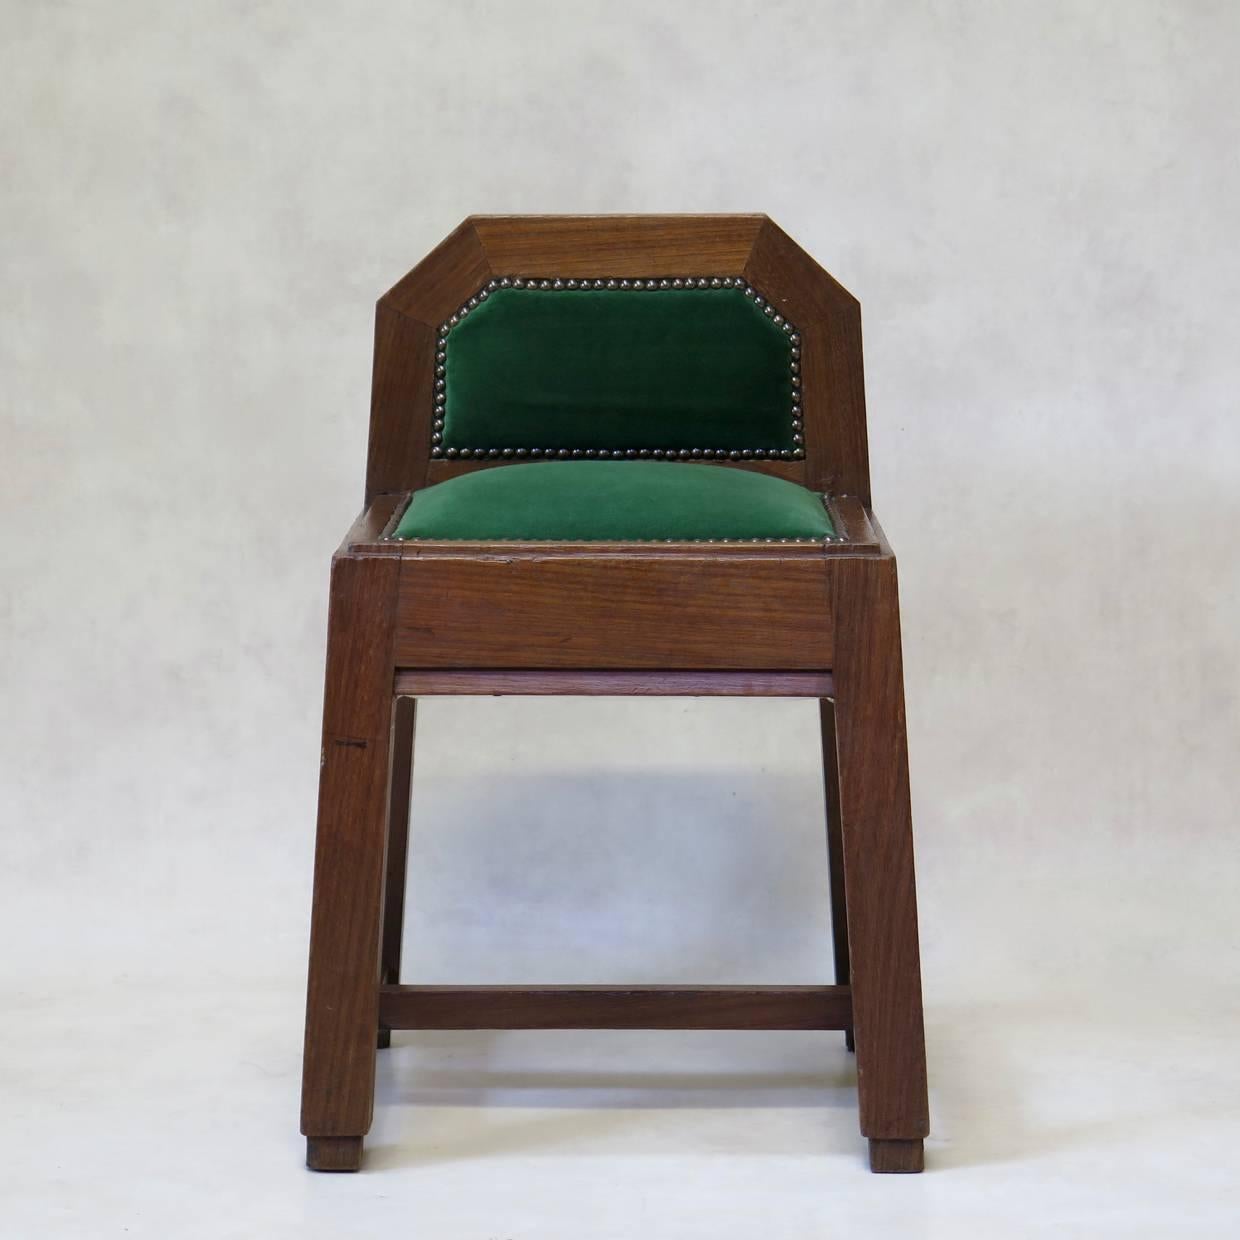 Solid and well-made pair of solid oak stools of unusual design. Elegant, with nice attention to detail. Newly upholstered in vintage green velvet.